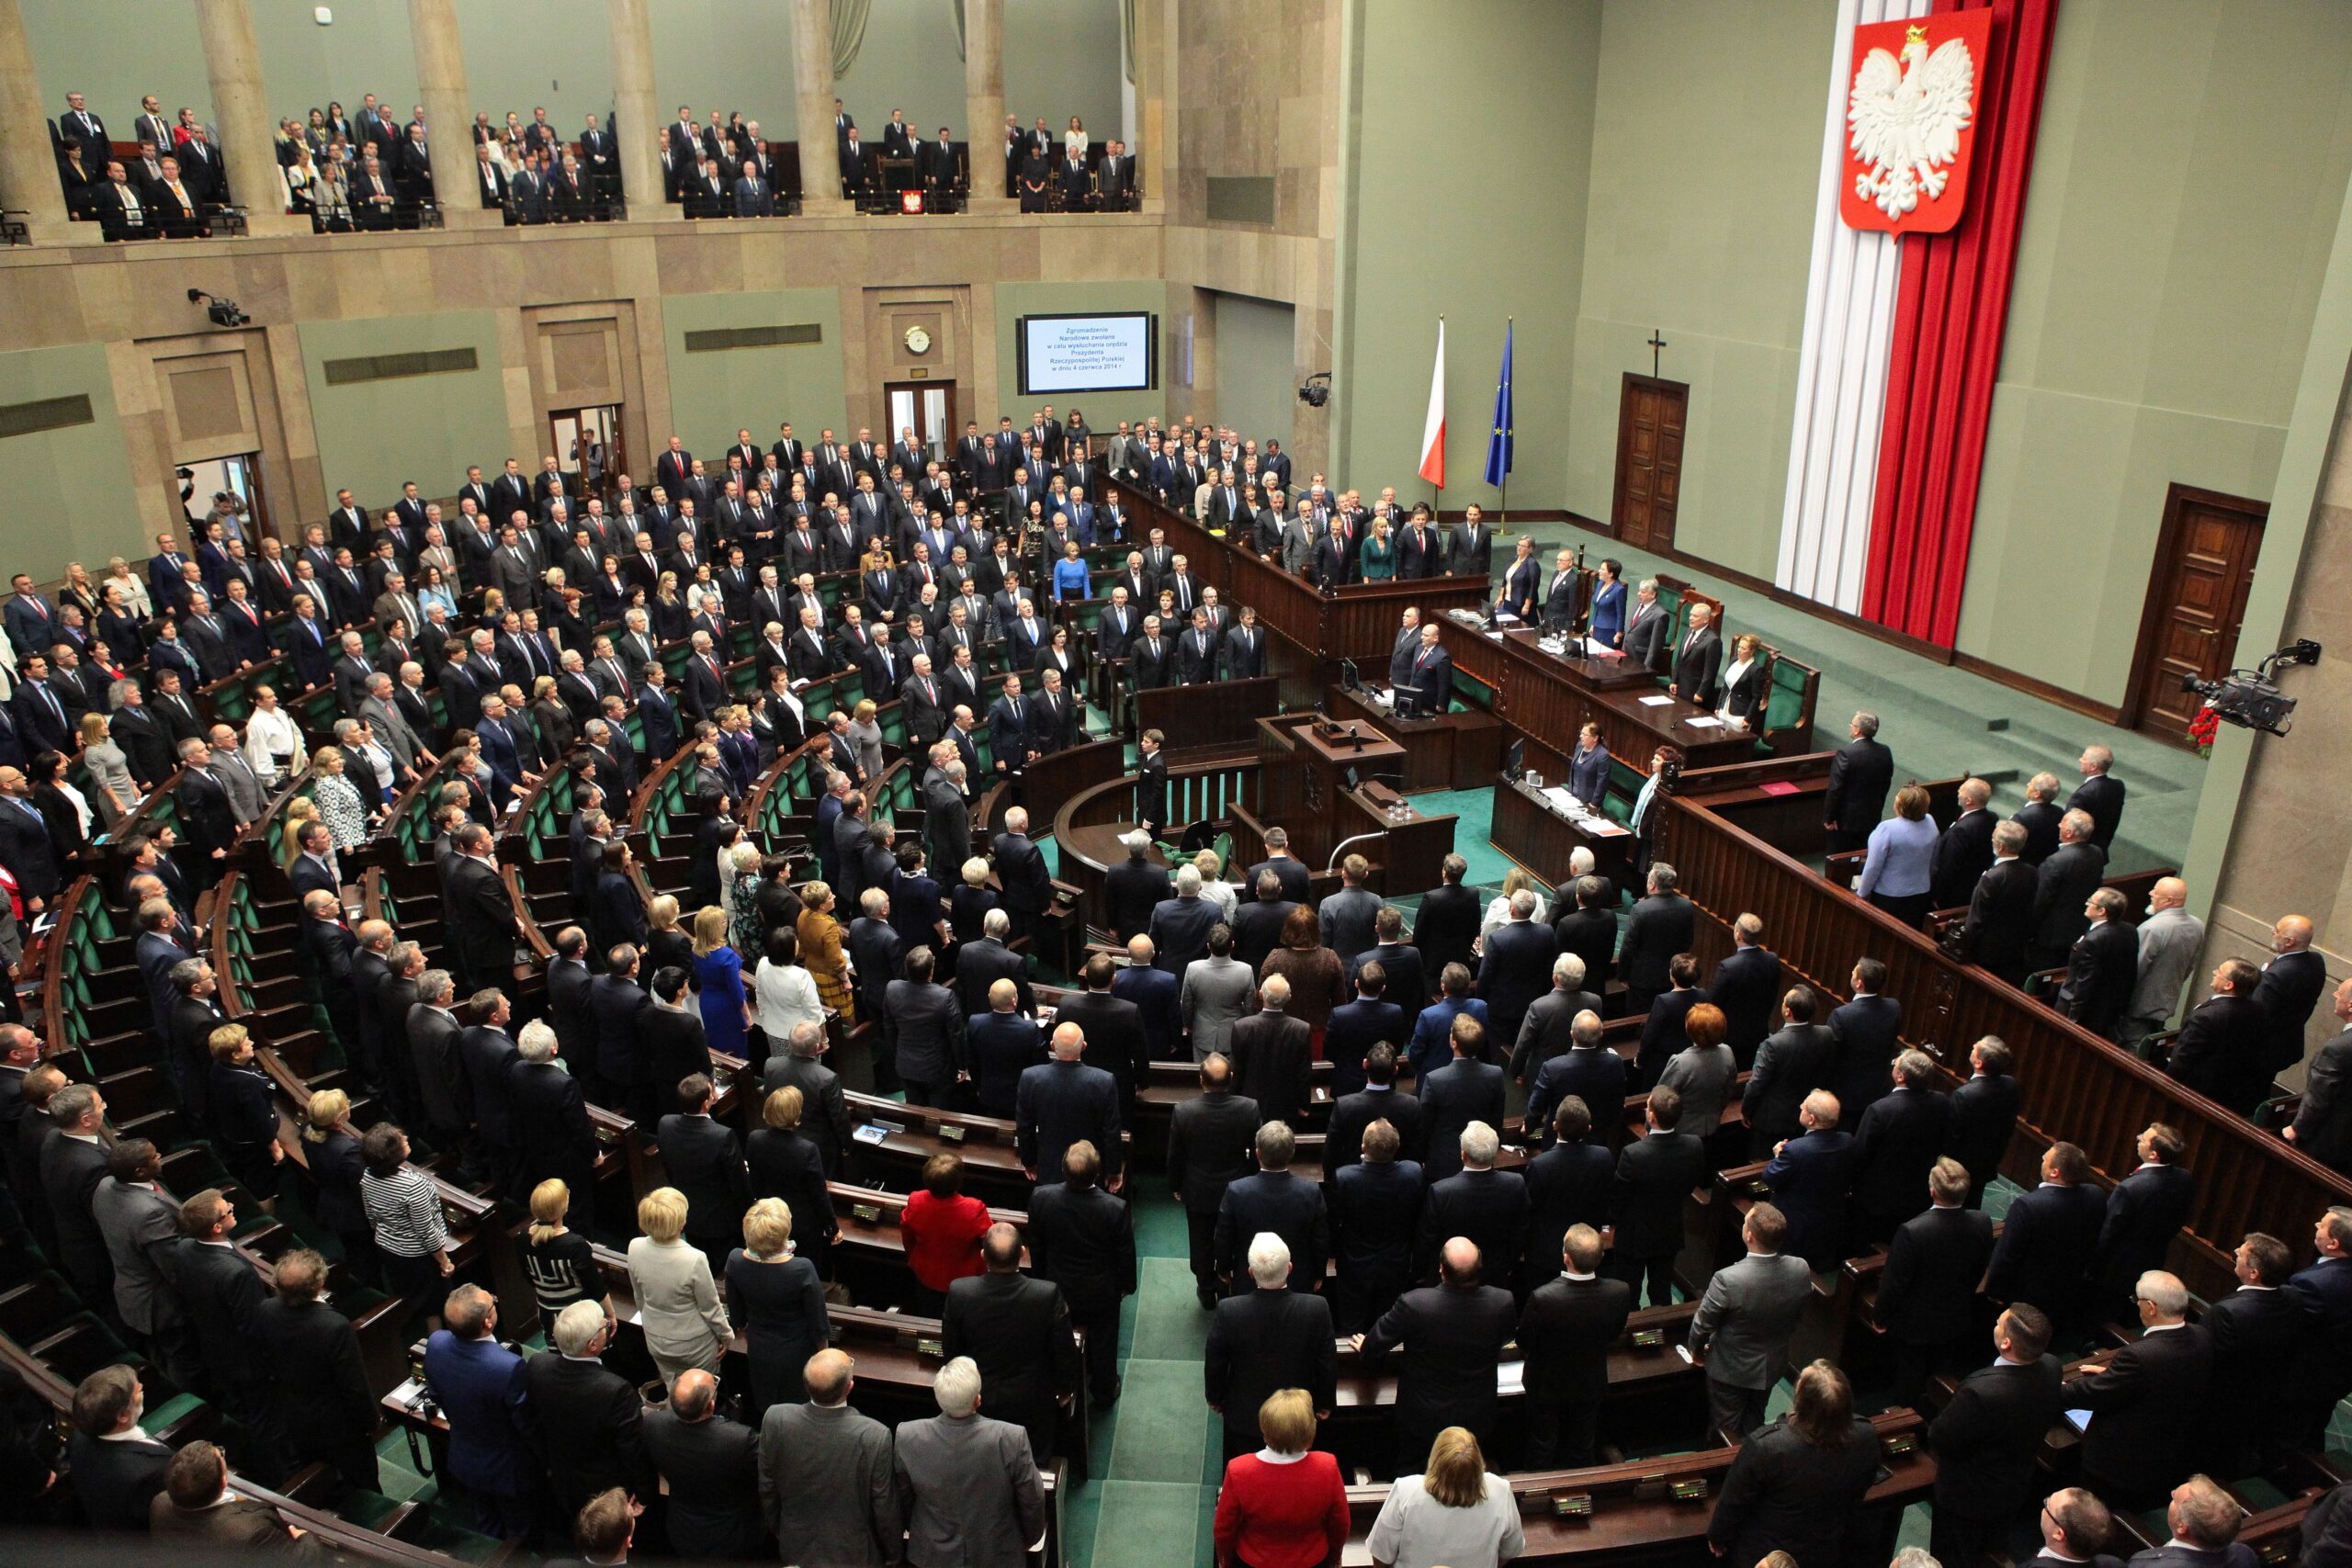 Trade Body Urges Polish Government to Relax Online Poker Laws to Help Economy